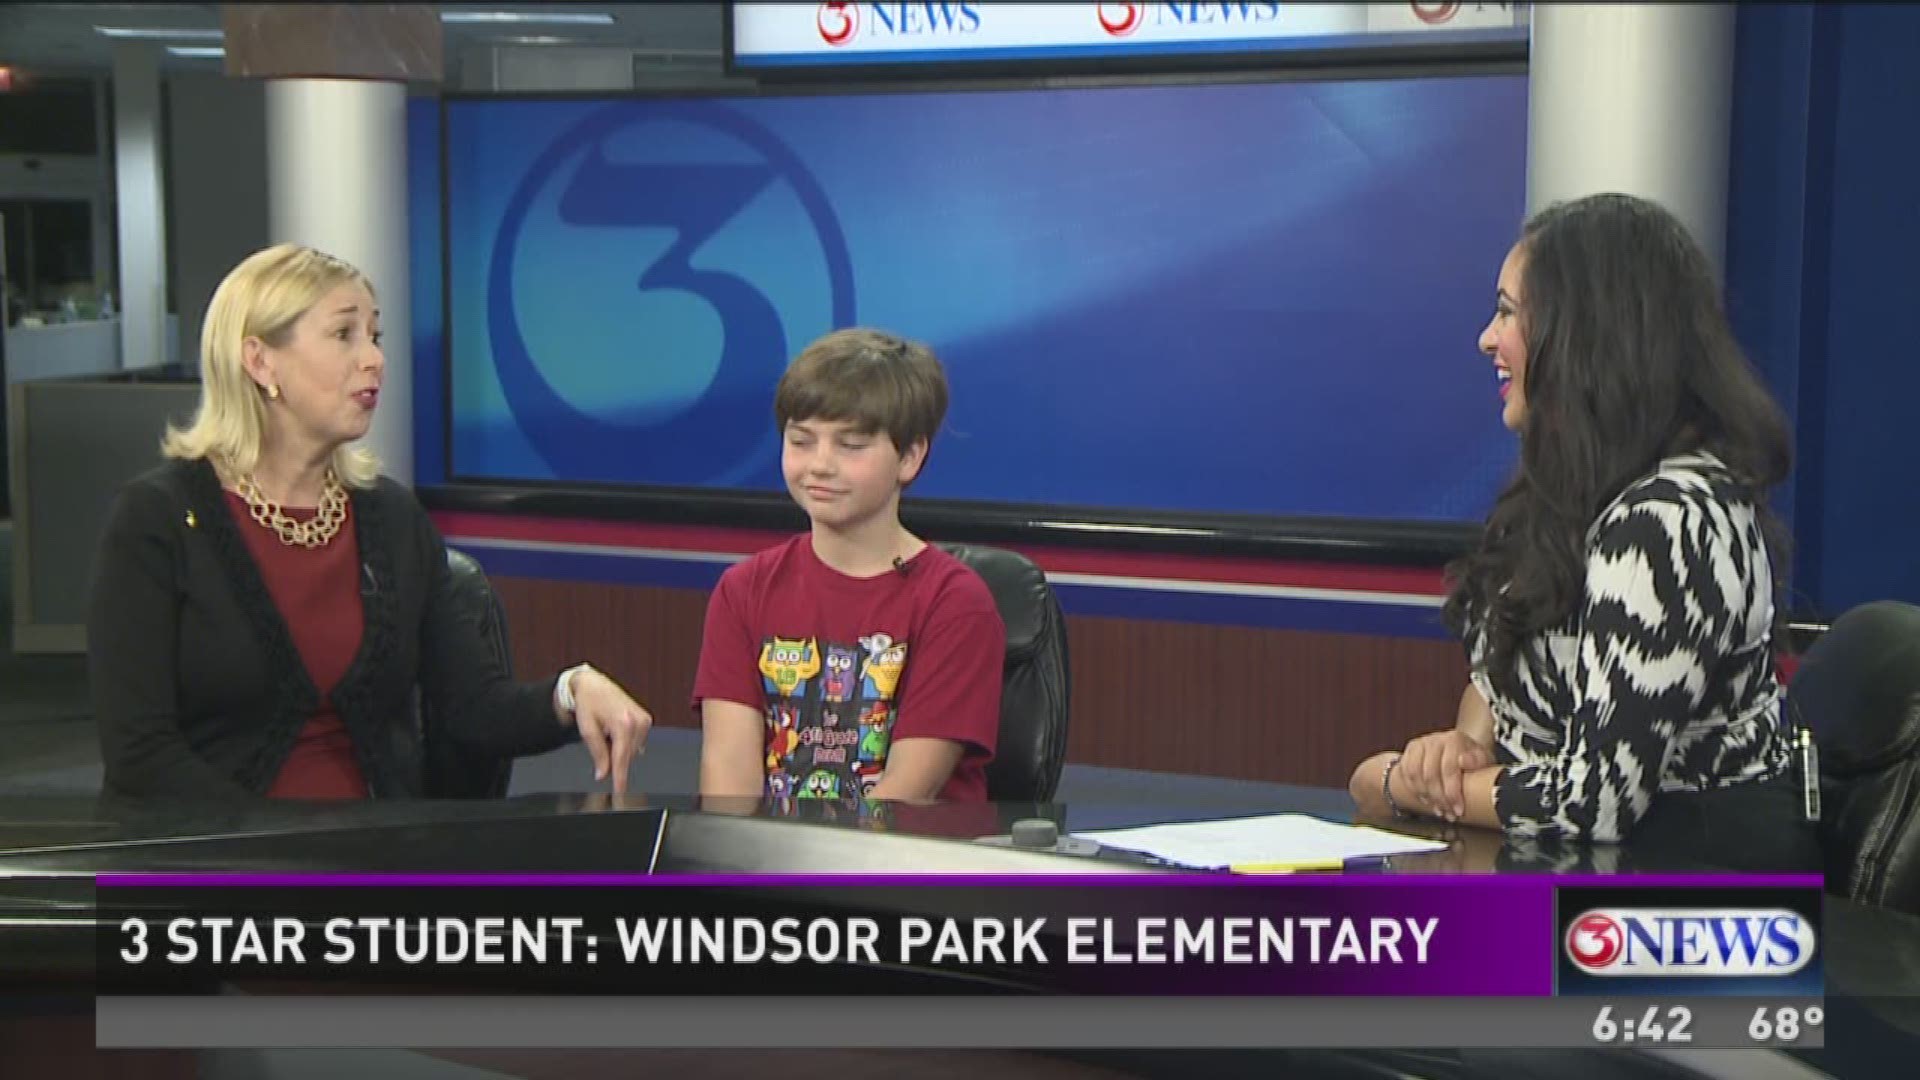 Congrats Laird Stearns from Windsor Park Elementary School!